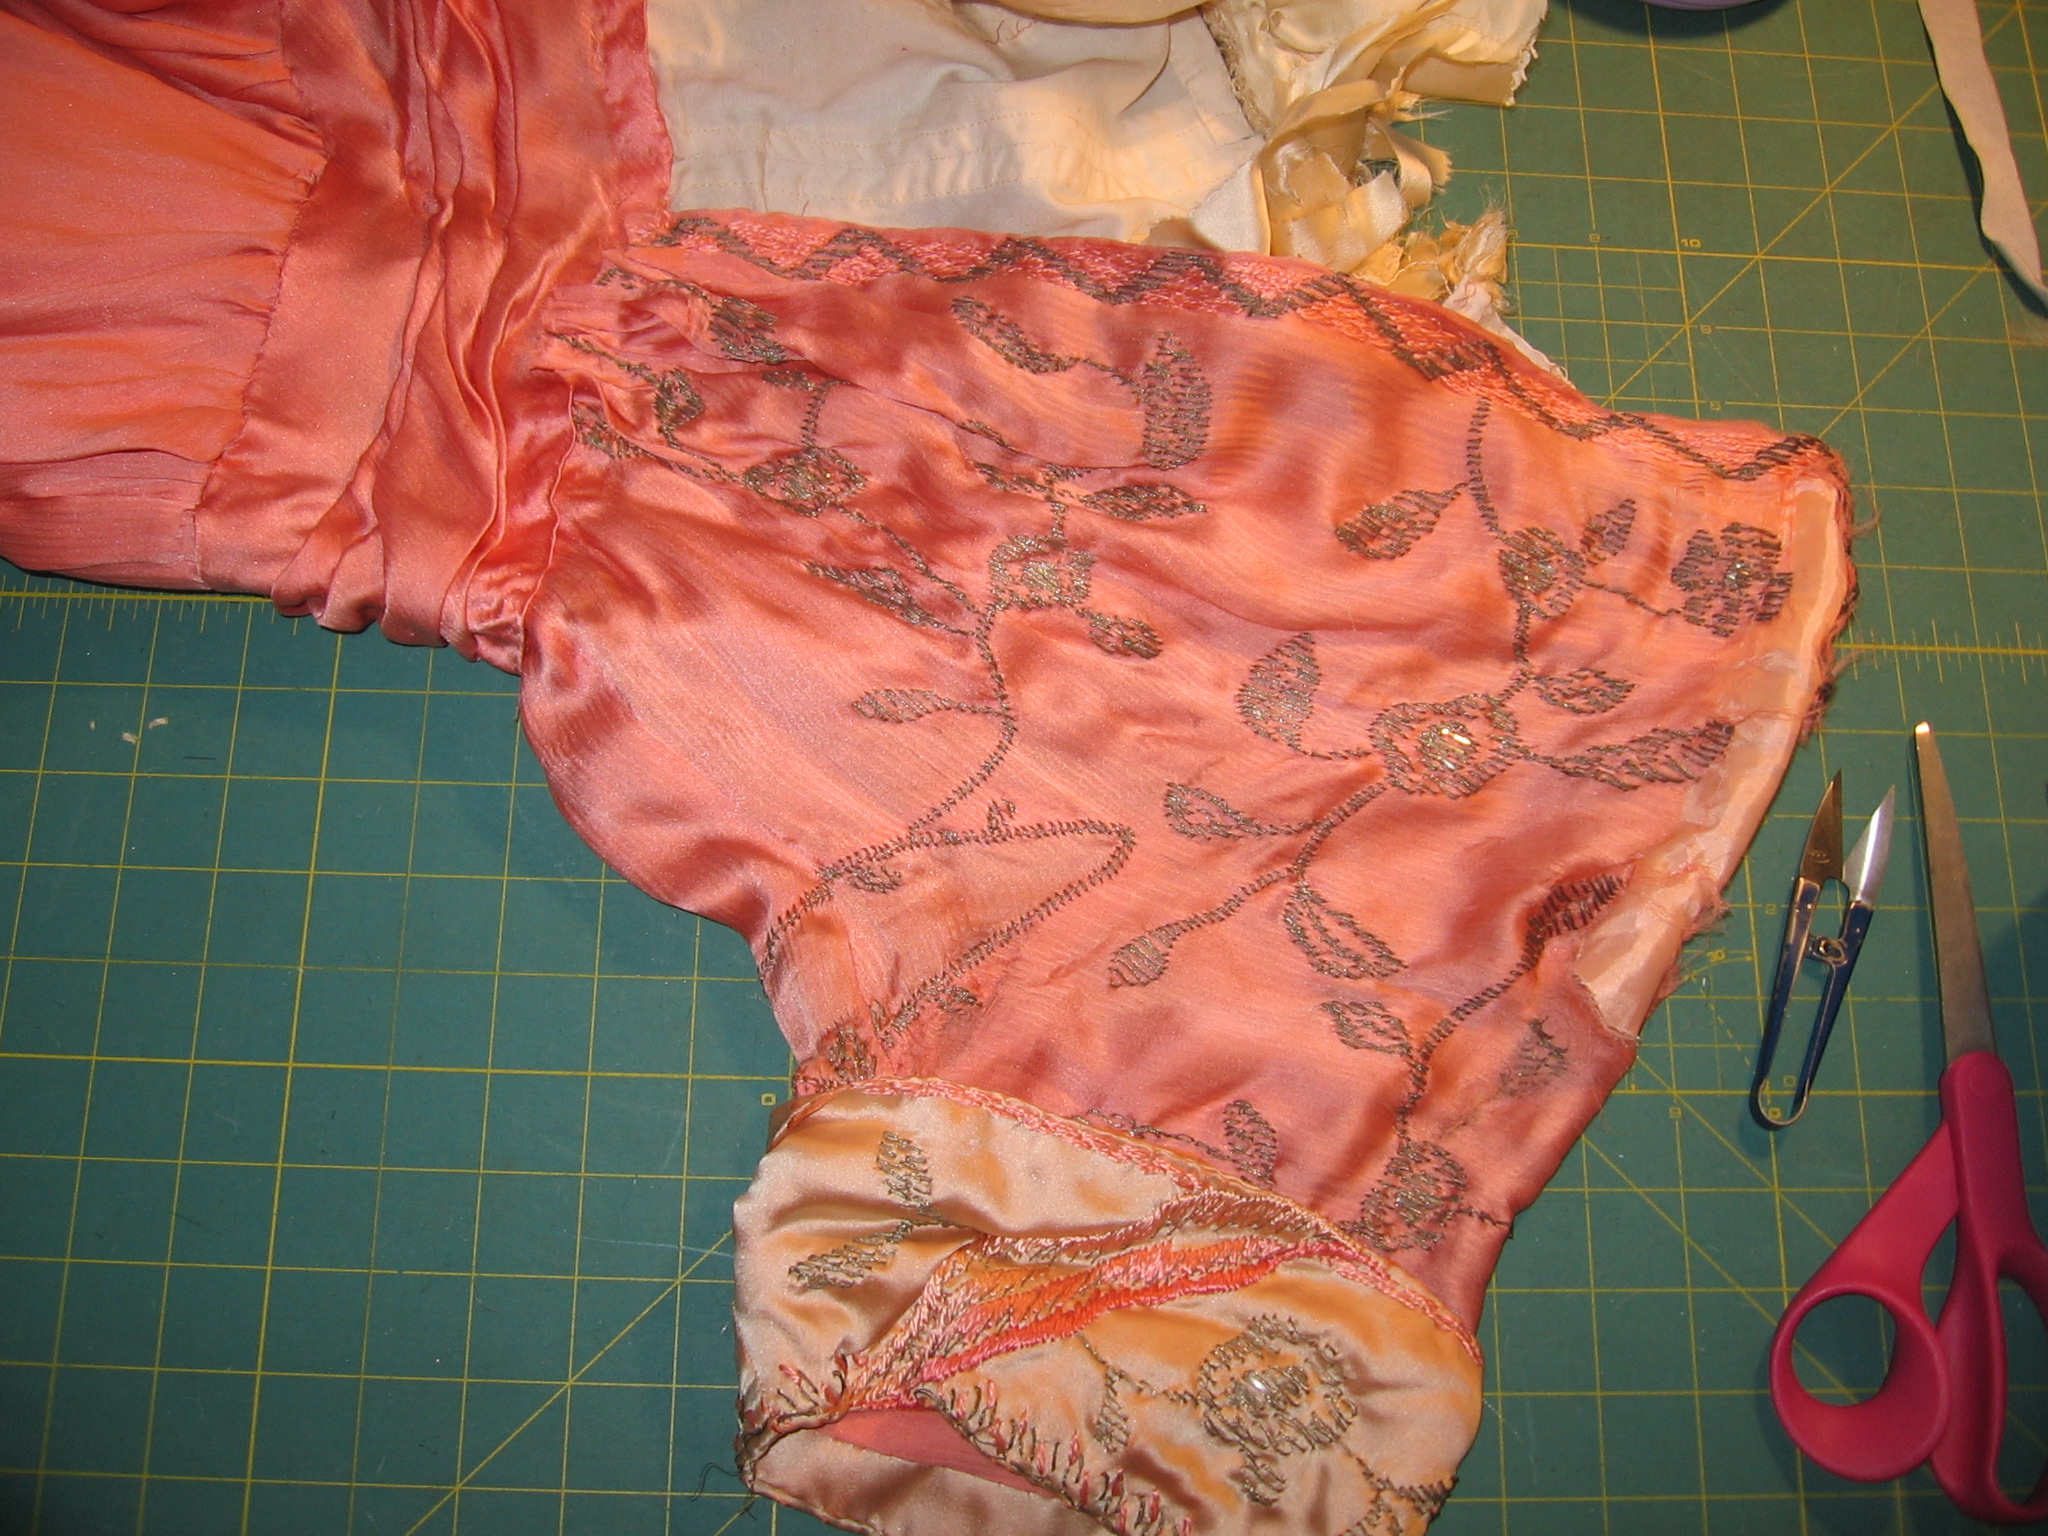 An underarm gusset was added for better fit and then embroidered to blend into the overall design.